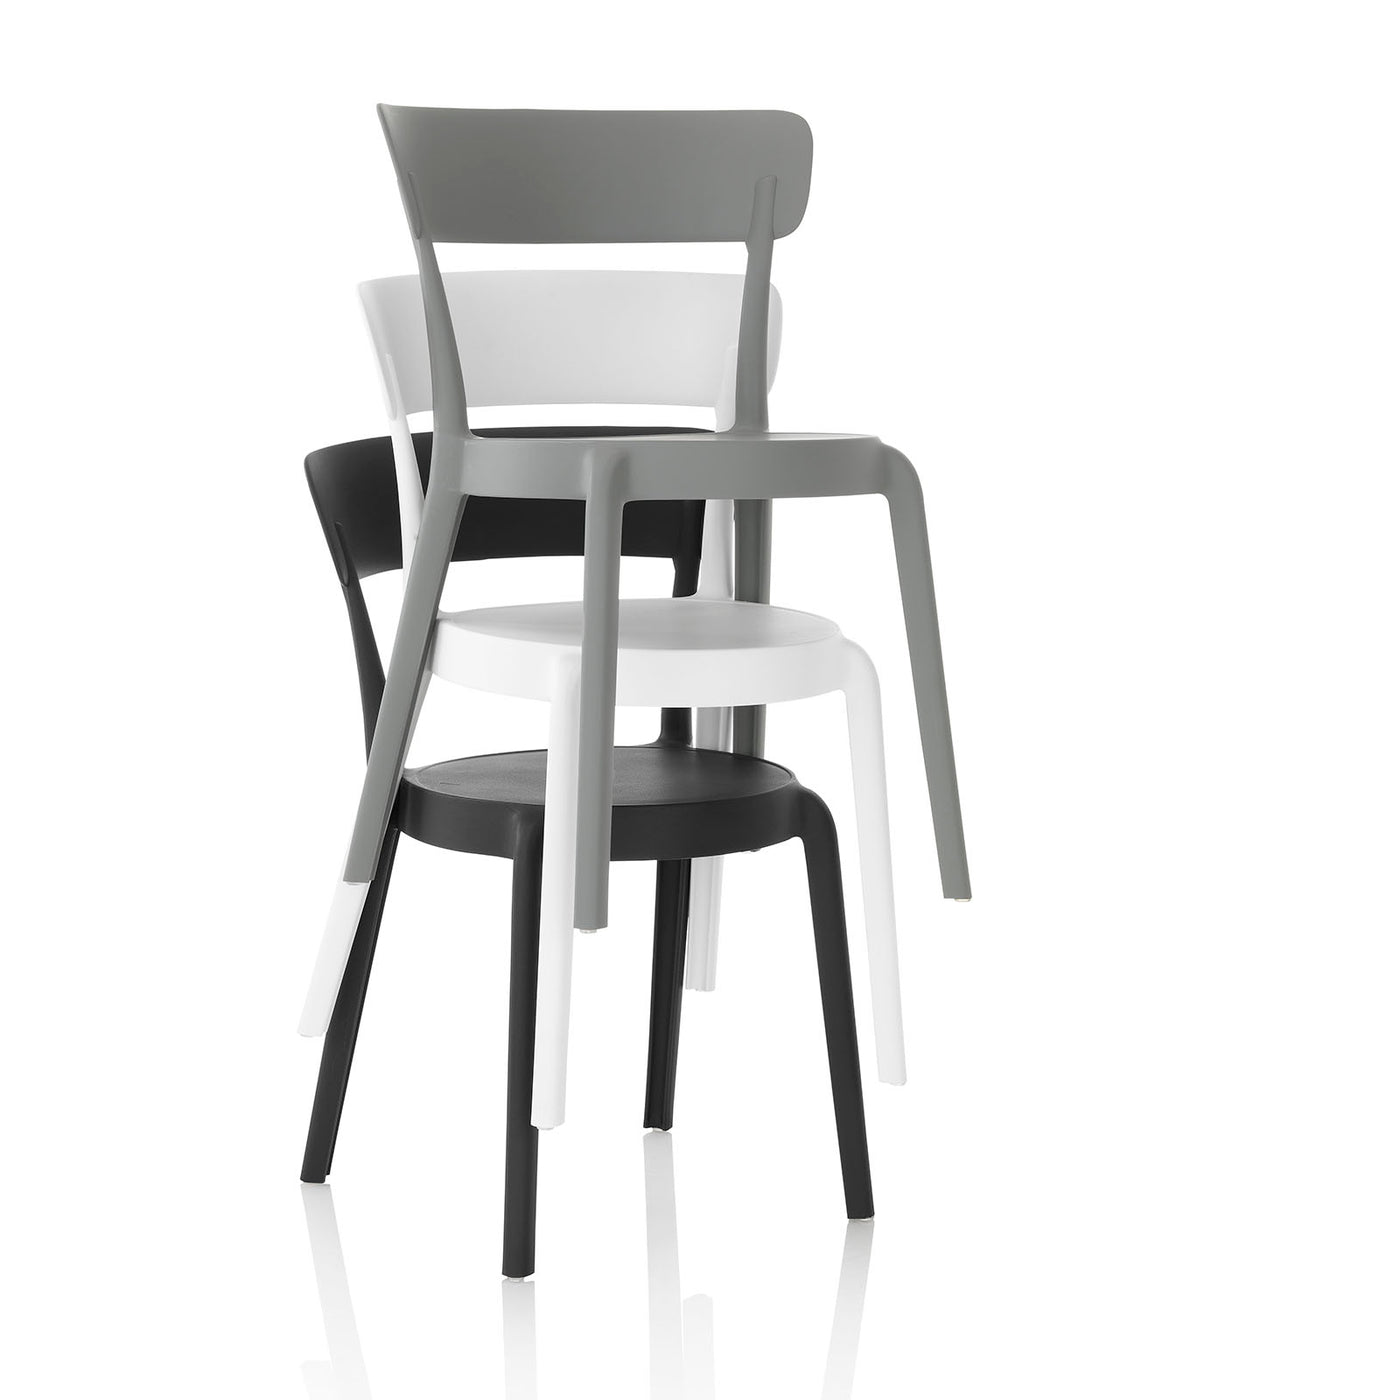 Set of 4 indoor/outdoor chairs MOSS white